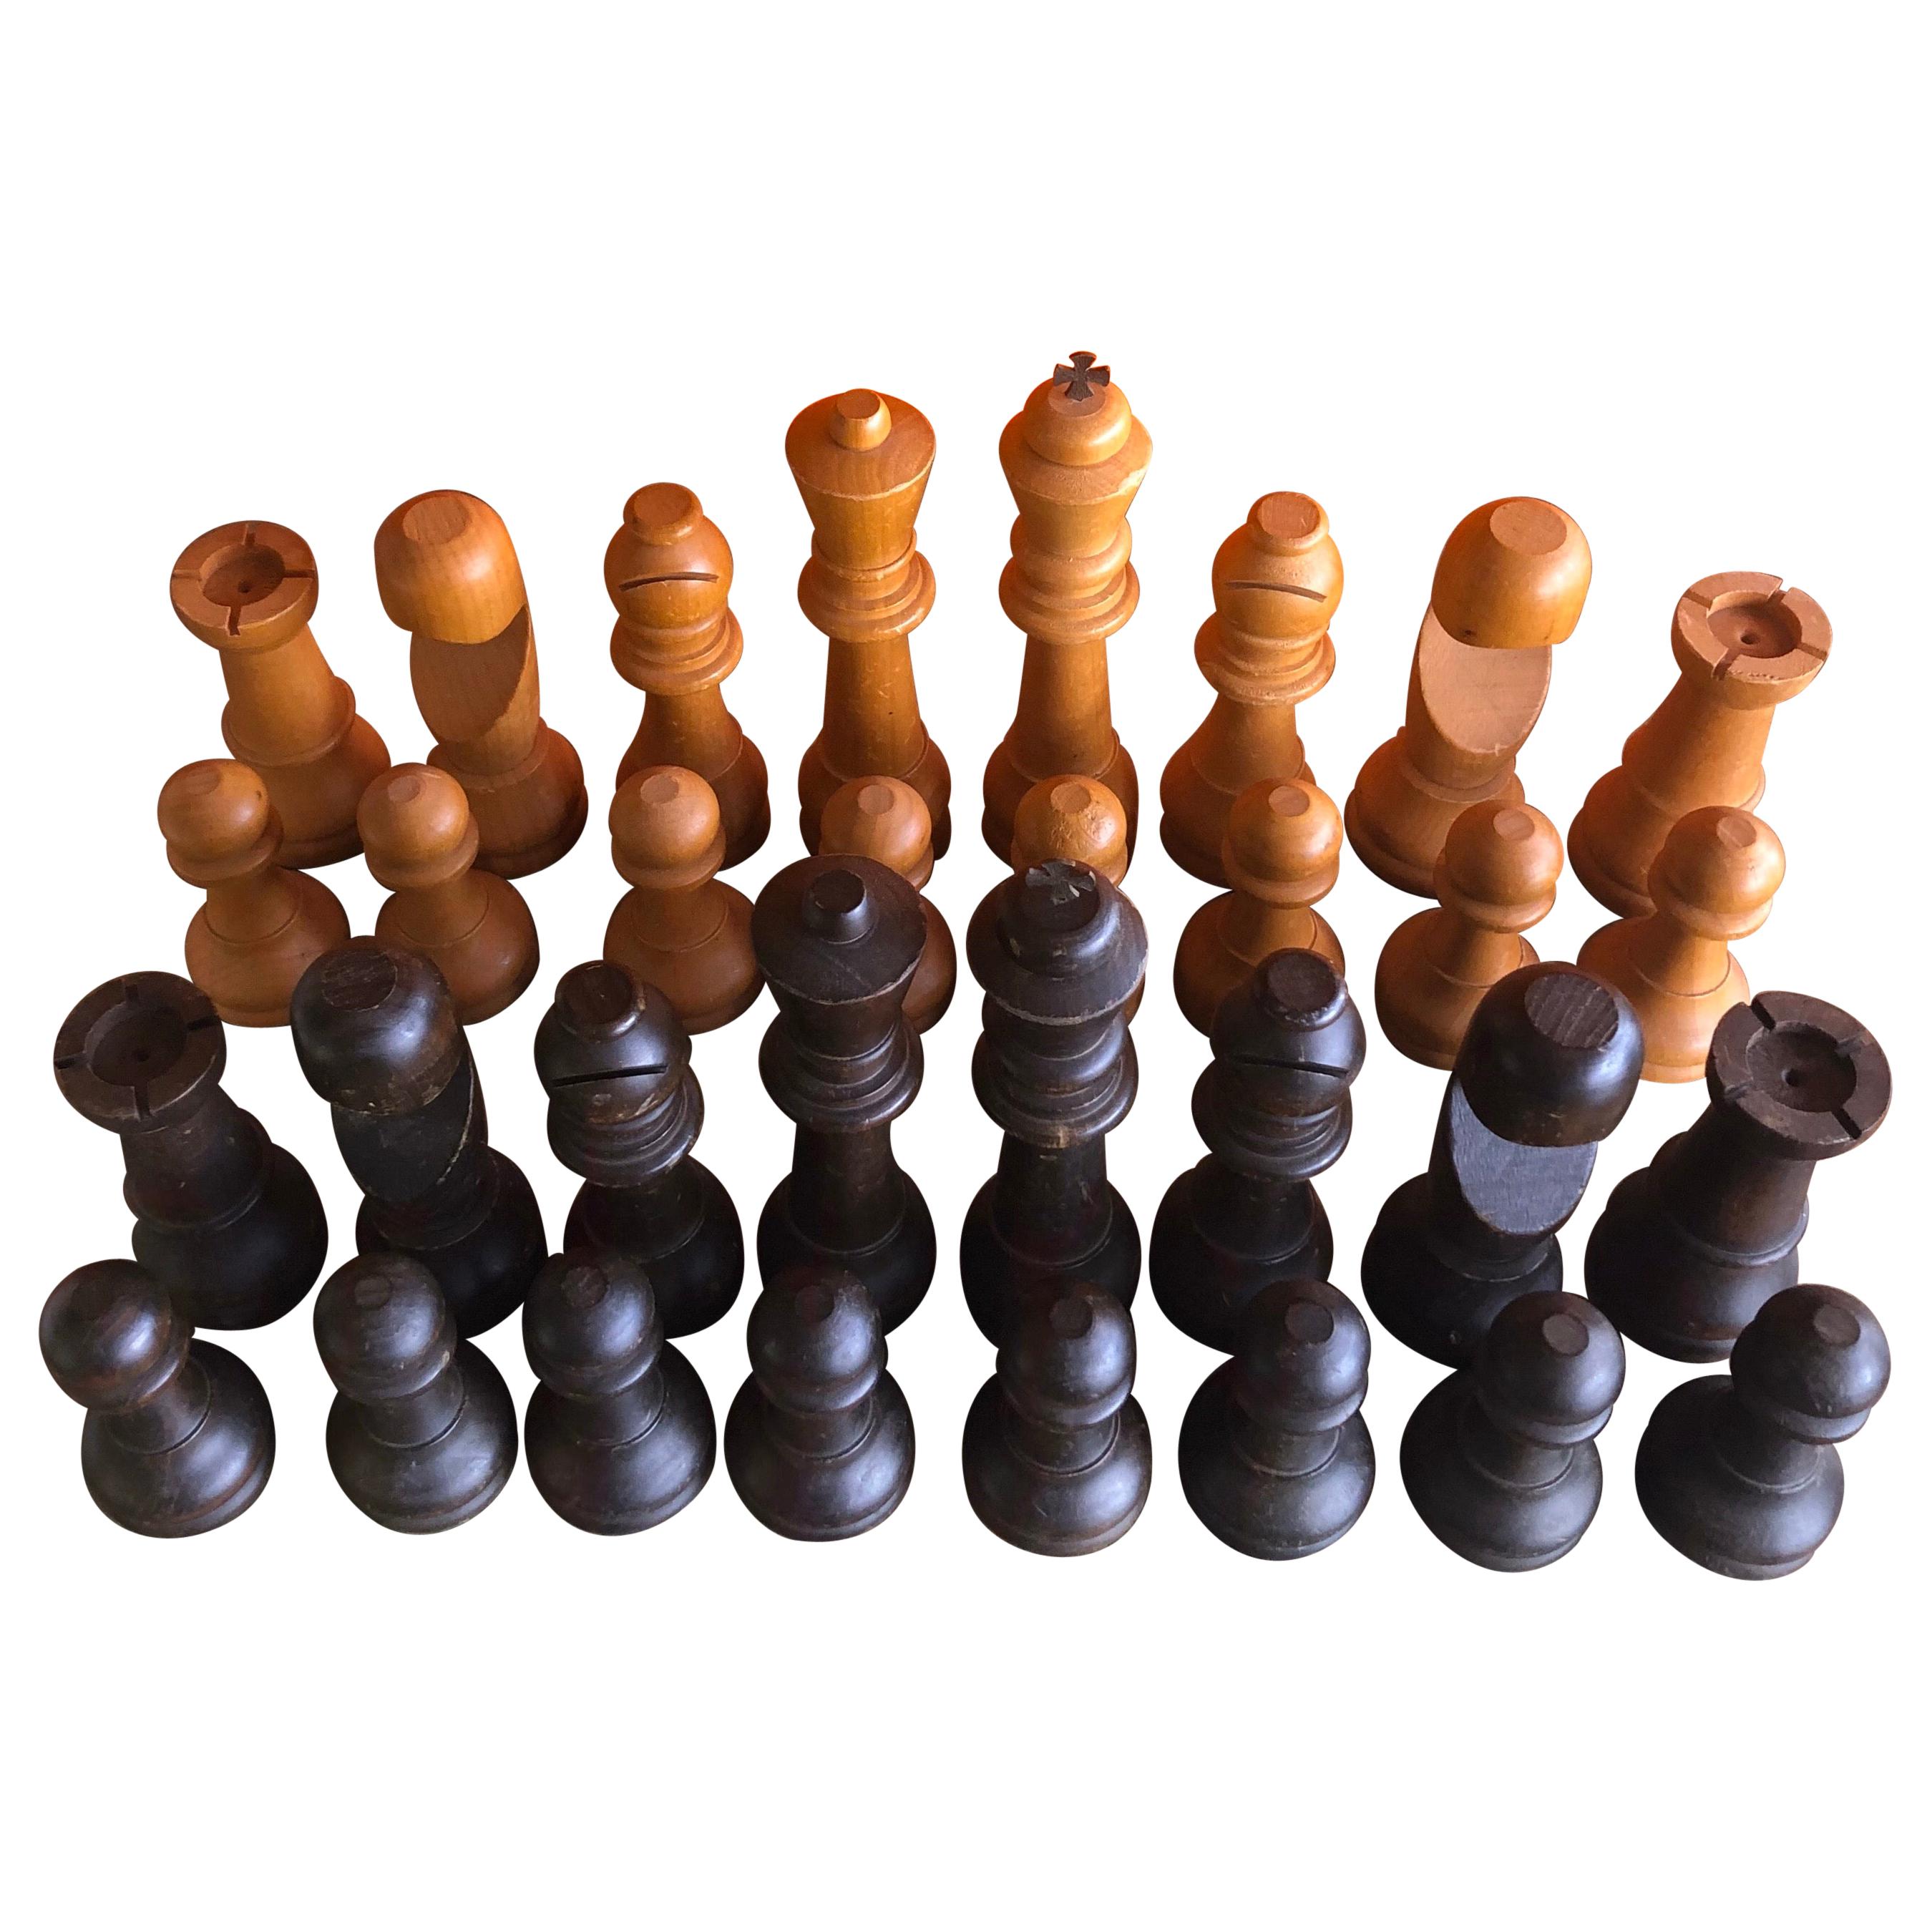 Vintage Set of Oversized Hand Carved Wooden Chess Pieces